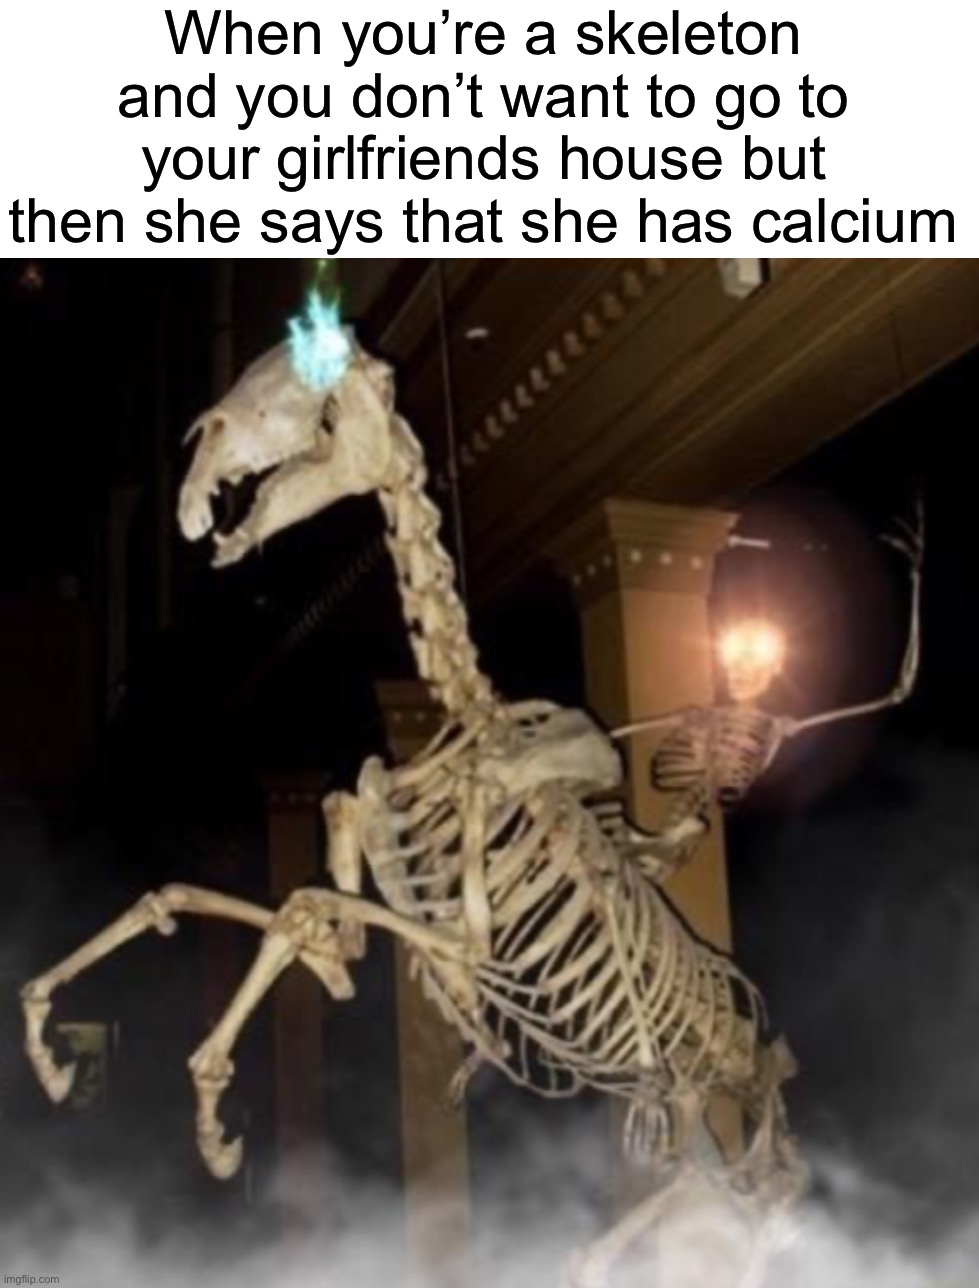 monday morning randomness - skeleton - When you're a skeleton and you don't want to go to your girlfriends house but then she says that she has calcium imgflip.com